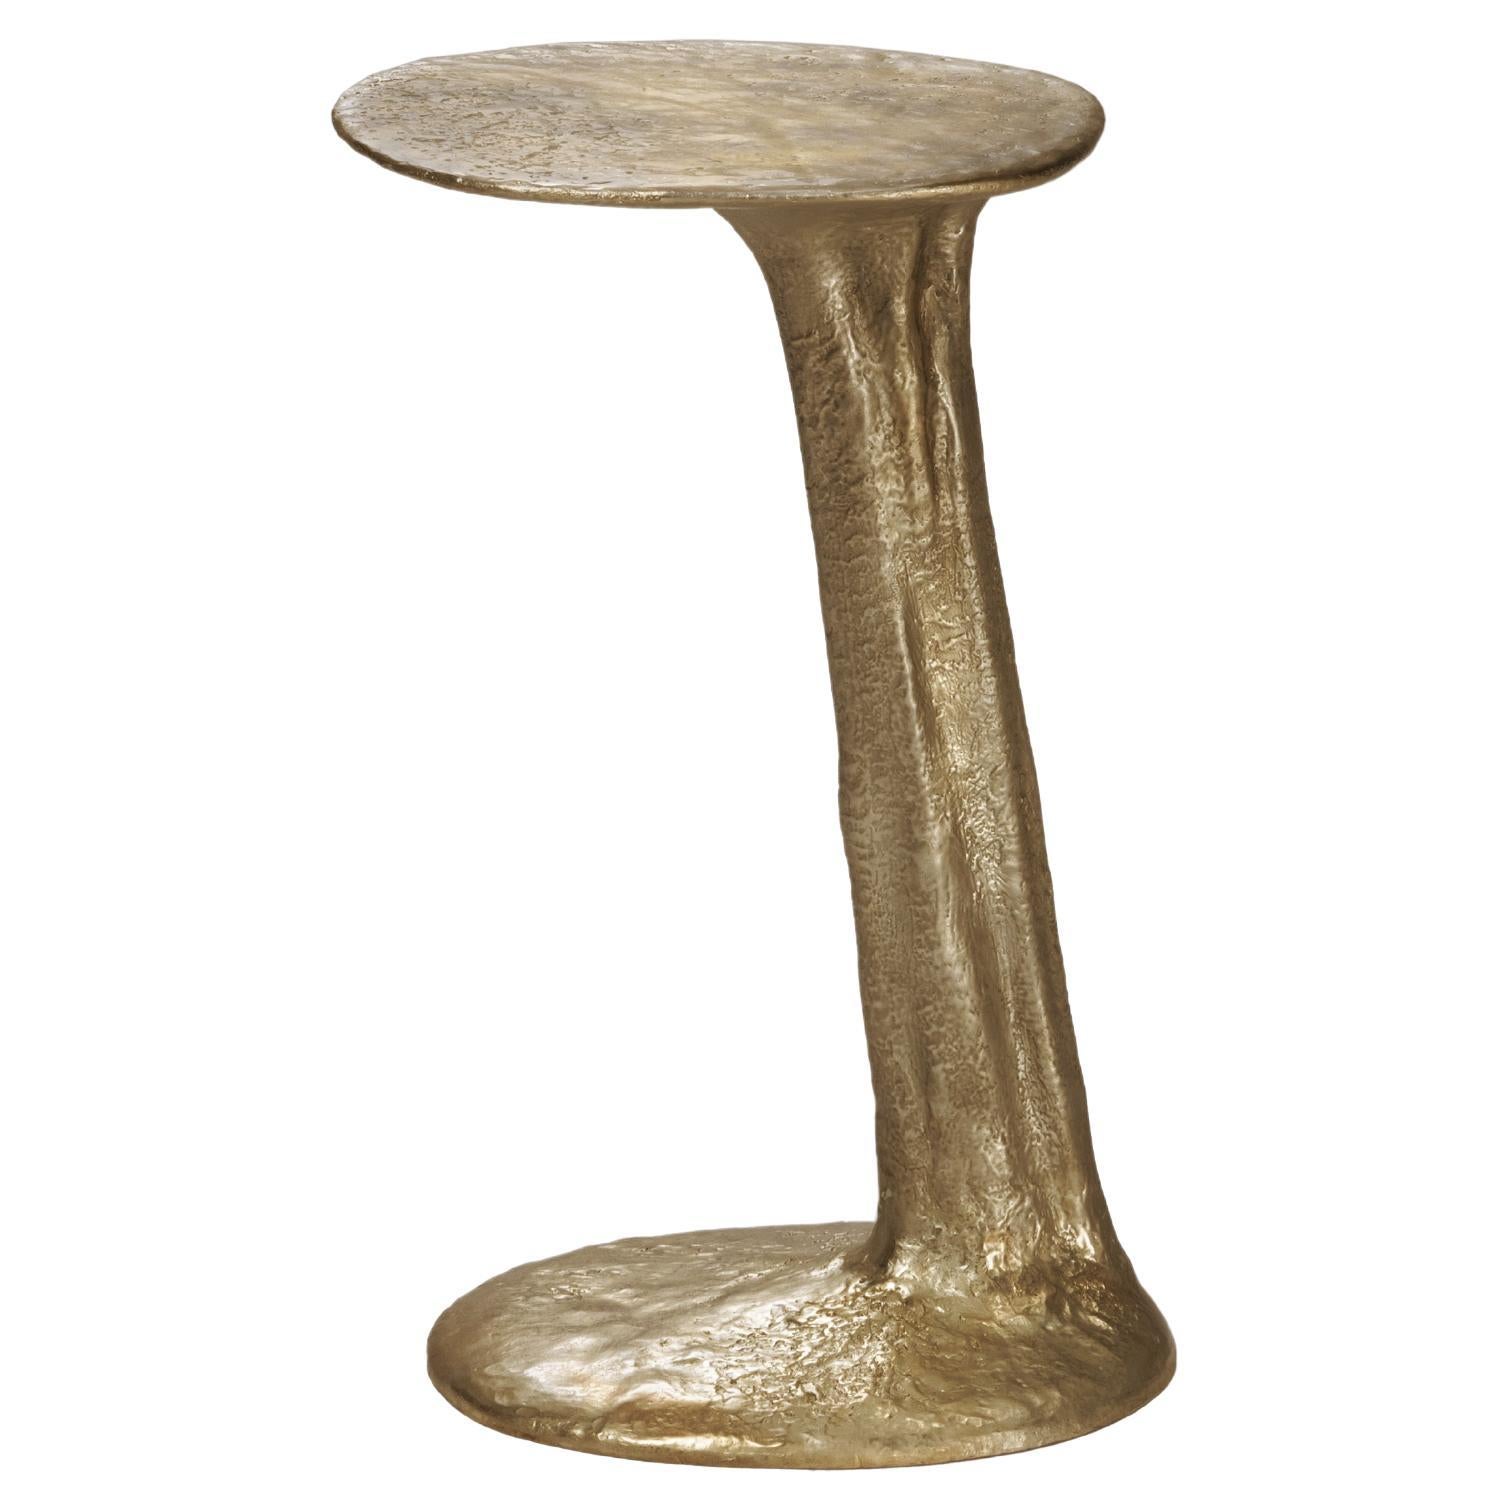 Contemporary Cast Brass Natural The Crack in Chaos Side Table S by Atelier V&F For Sale